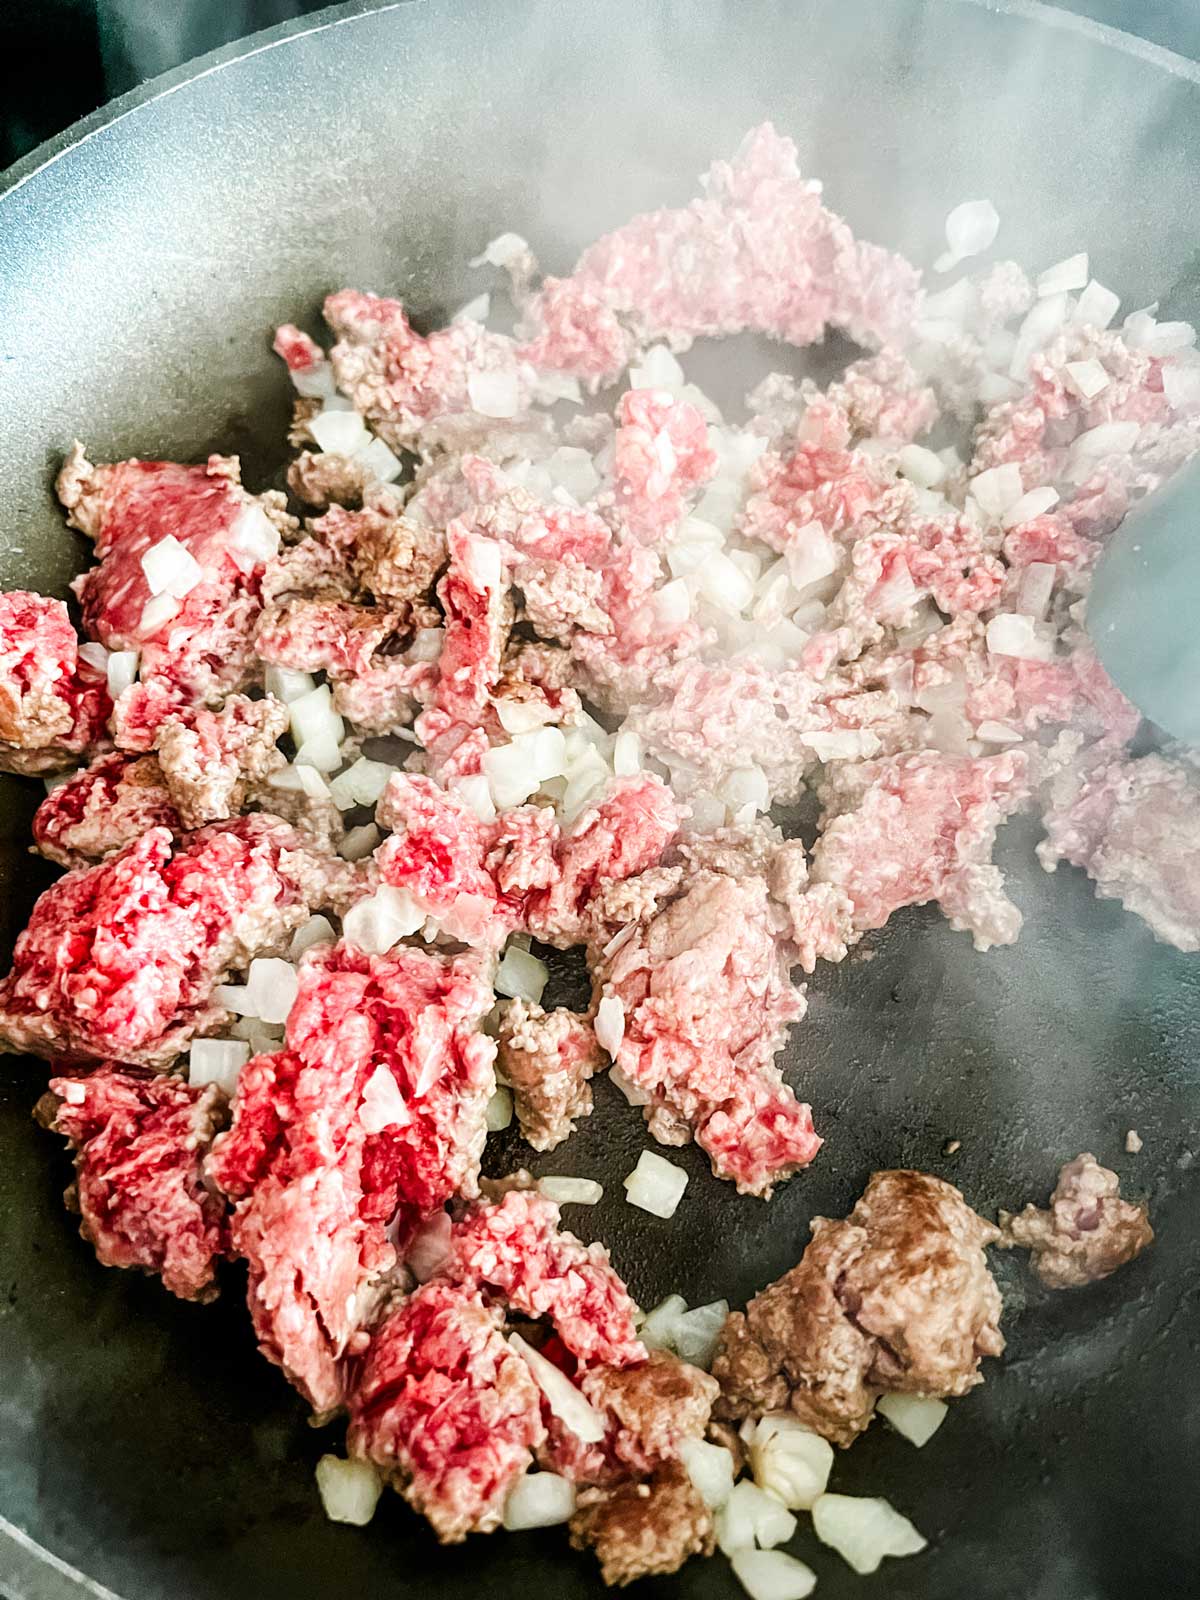 Ground beef and onion cooking in a skillet.